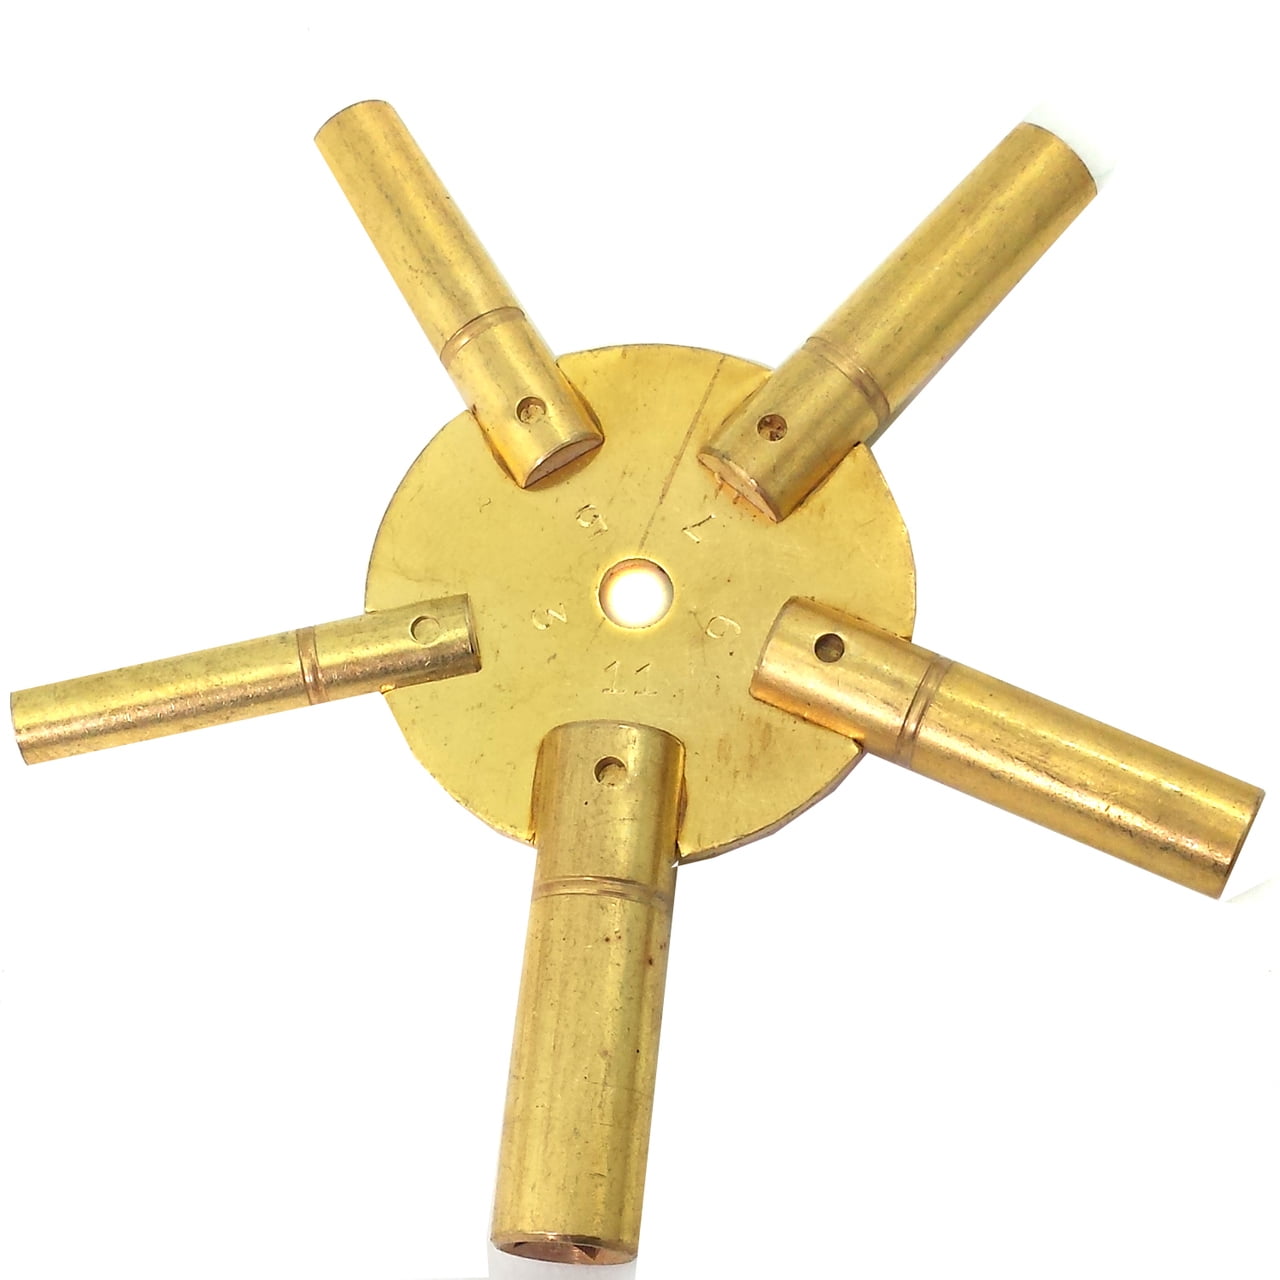 Clock Winding Key Brass NEW 4.25 mm Size Number 8 Fits Antique Vintage Clocks 